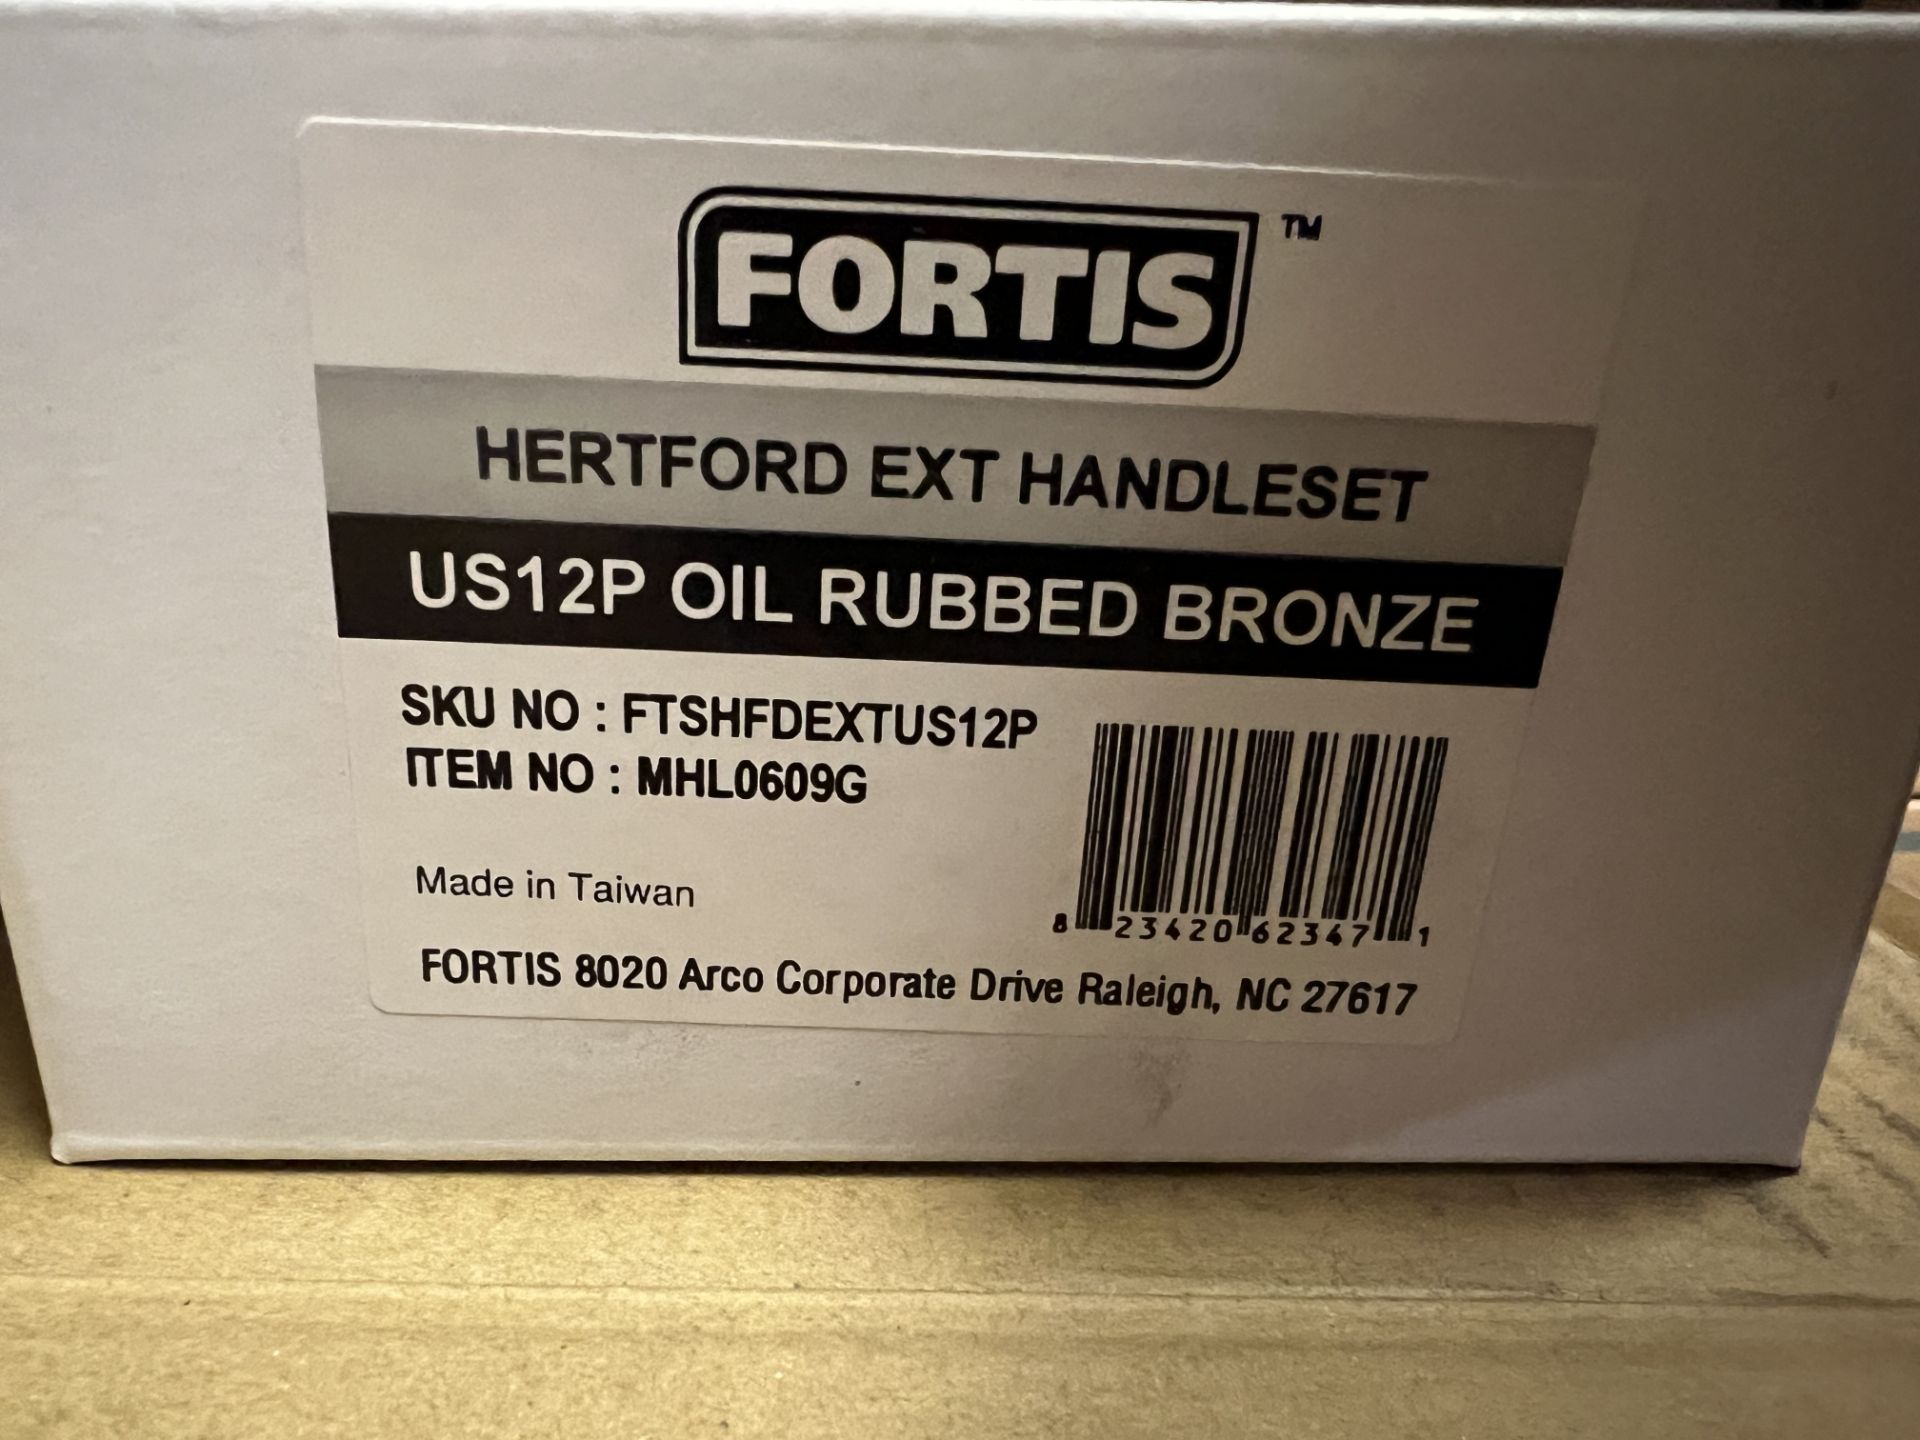 (10) FORTIS HERTFORD EXT HANDLESET US12P OIL RUBBED BRONZE - Image 2 of 3